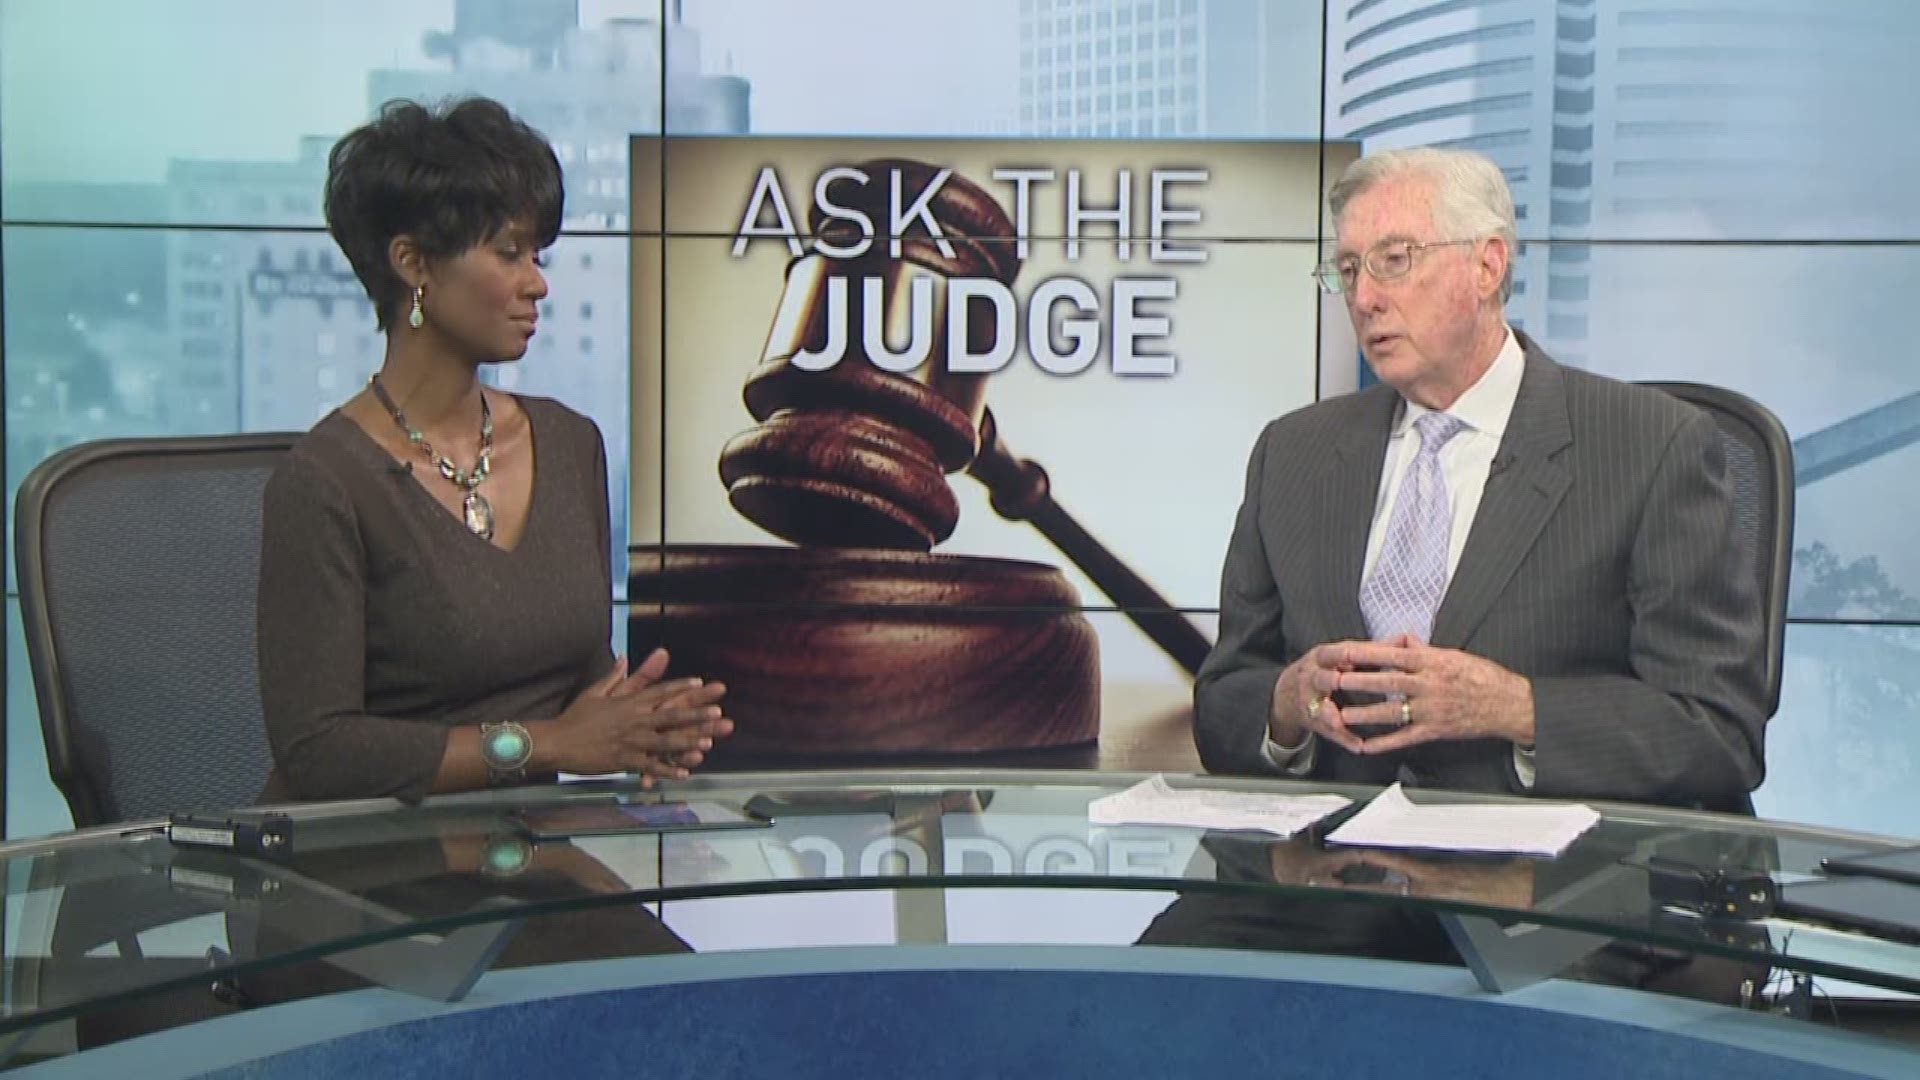 From liability questions, custody questions, and community property questions, Judge Larry Thorne has the answers. You can send Ask the Judge questions to 12news@12newsnow.com